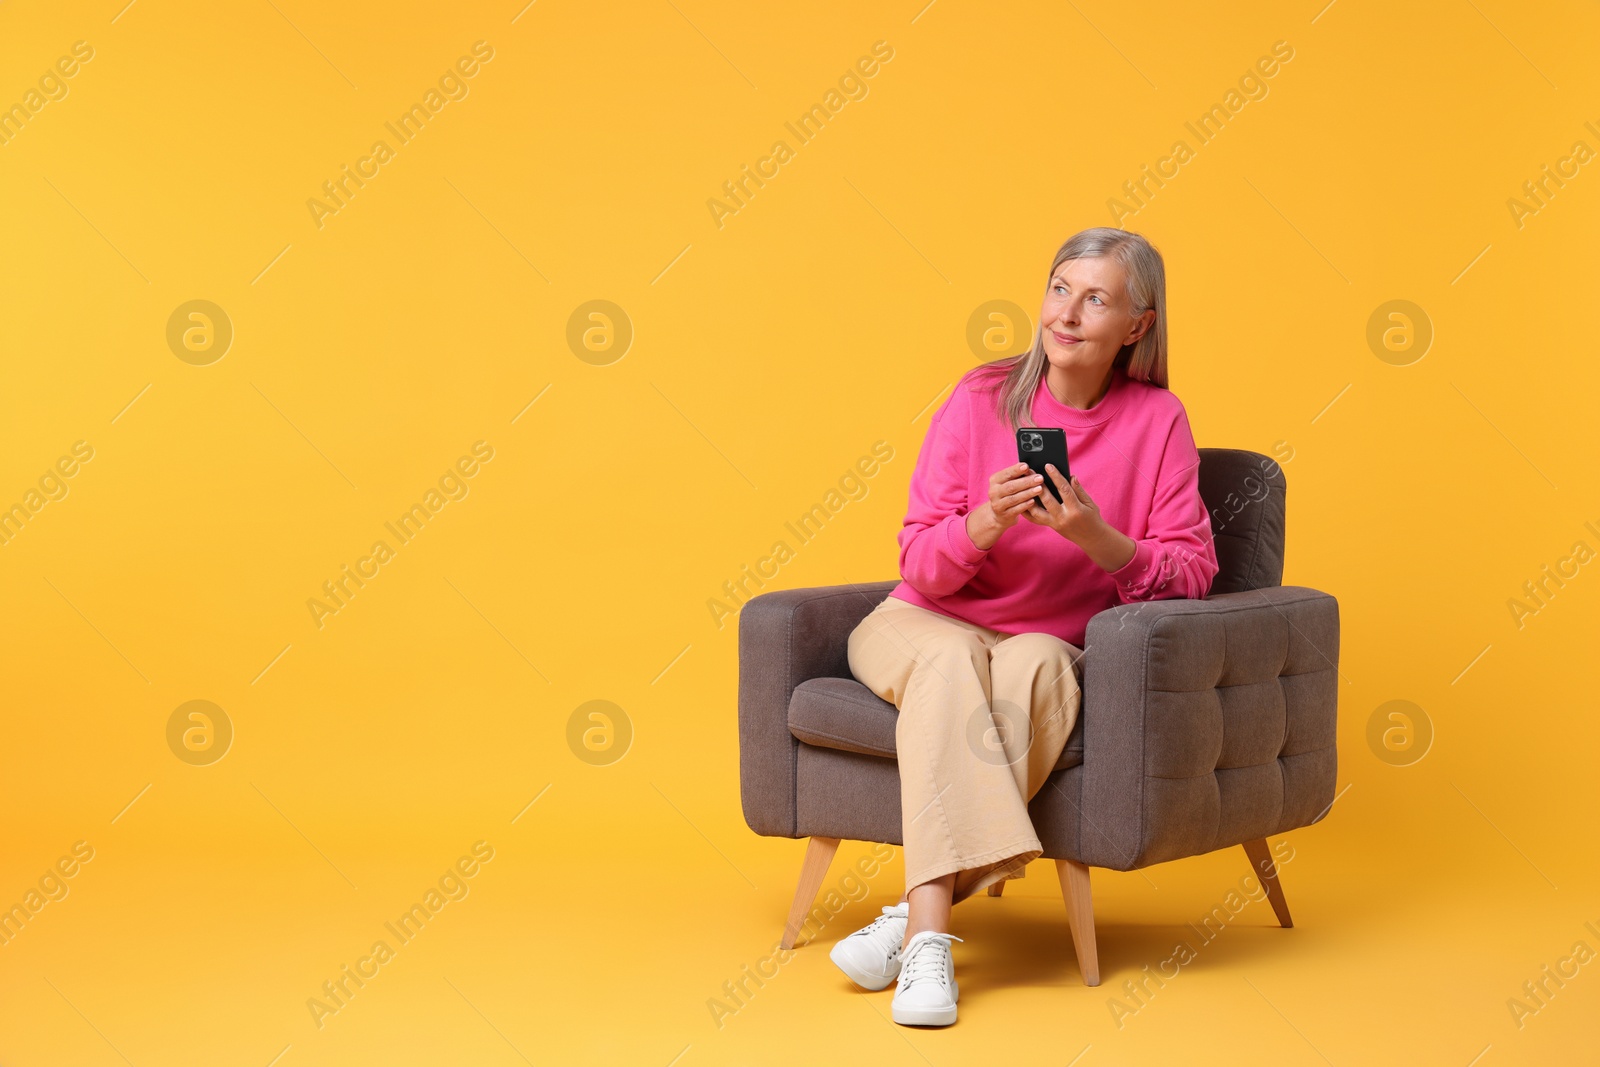 Photo of Senior woman with phone on armchair against orange background, space for text